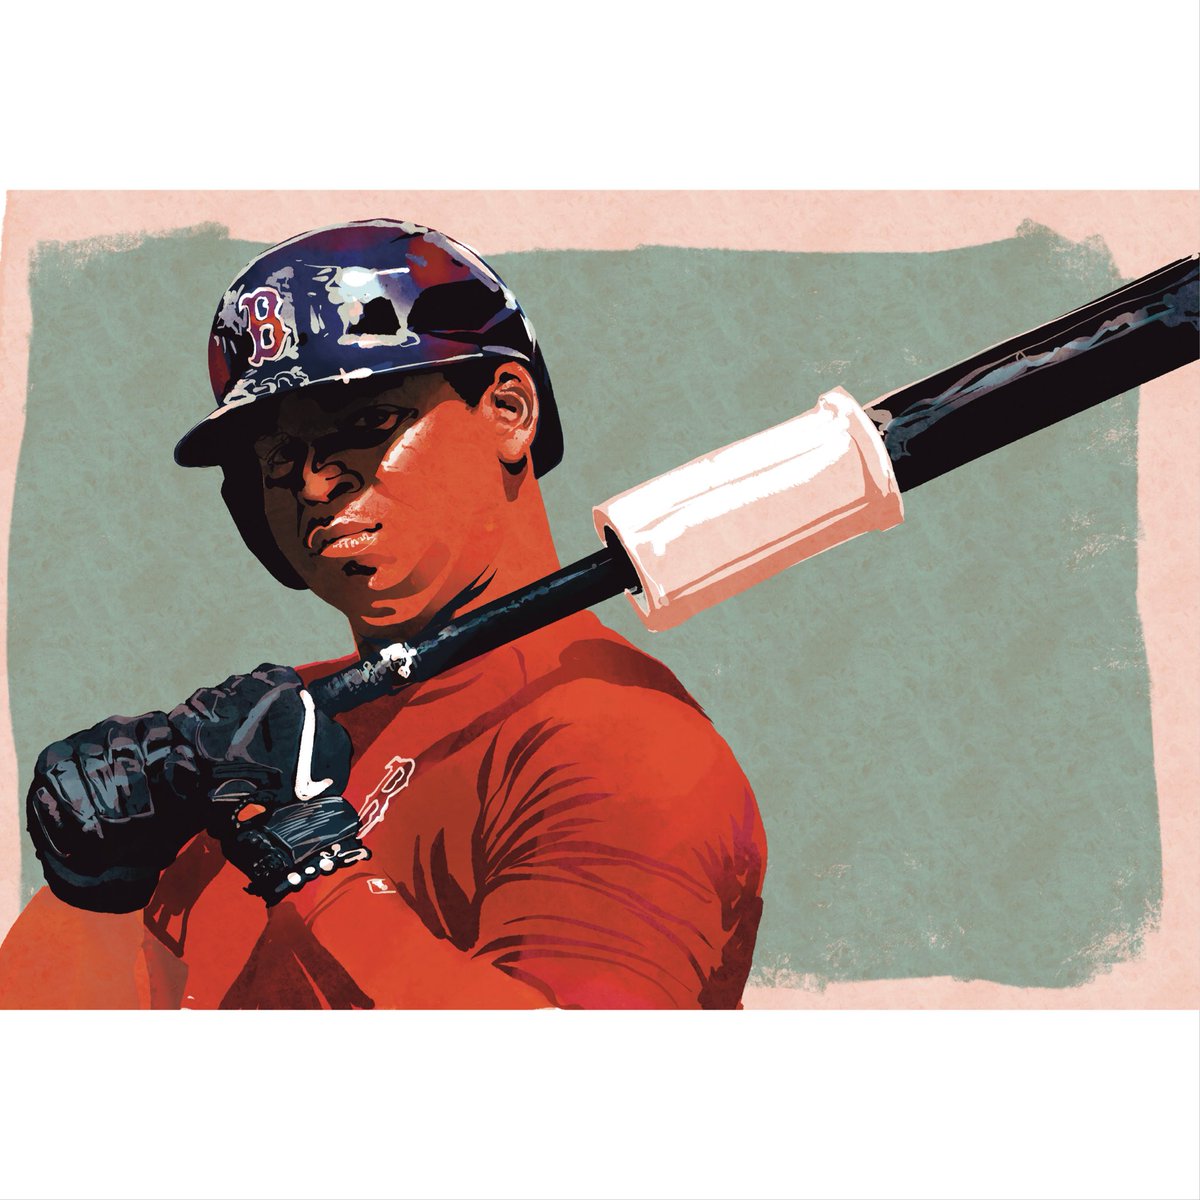 This Day in Baseball History: May 20, 2024 - With a two-run shot off Taj Bradley in the 4th inning, Rafael Devers homers in his sixth straight game for a new Red Sox franchise record. #tripleplaydesign #rafaeldevers #bostonredsox #devers #baseballcards #baseball #mlb